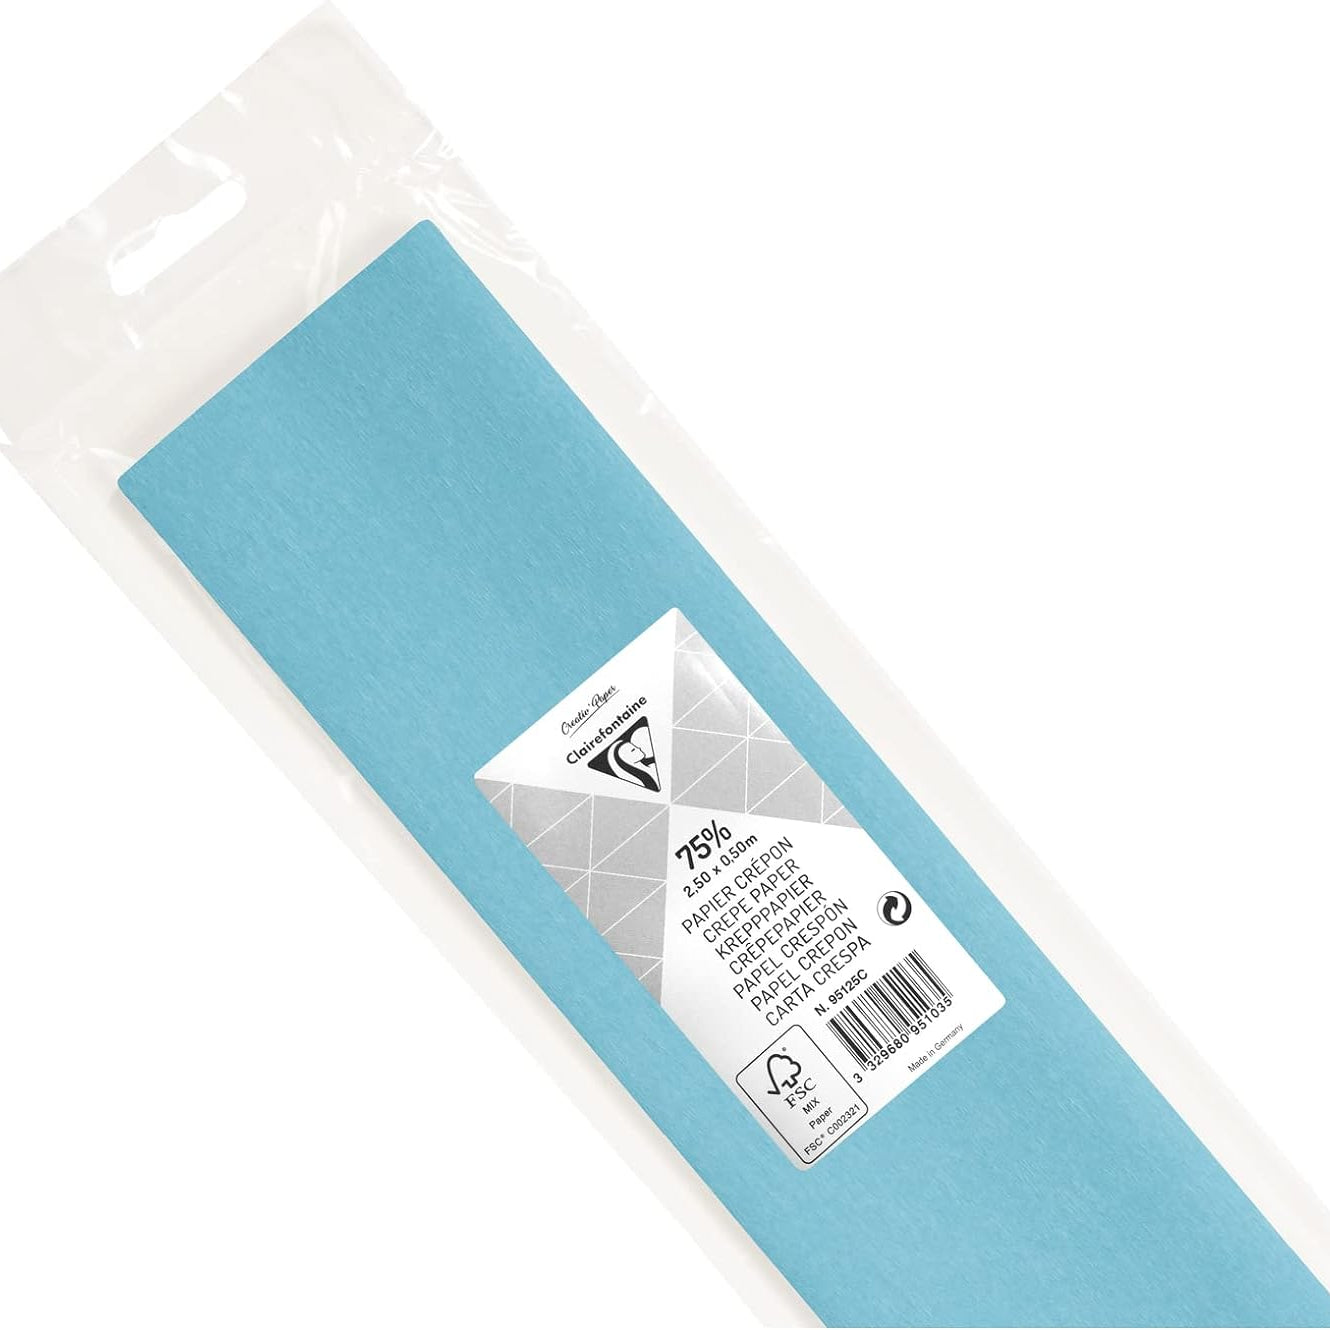 CLAIREFONTAINE Crepe Paper Roll 75% 2.5x0.5M Turquoise Blue